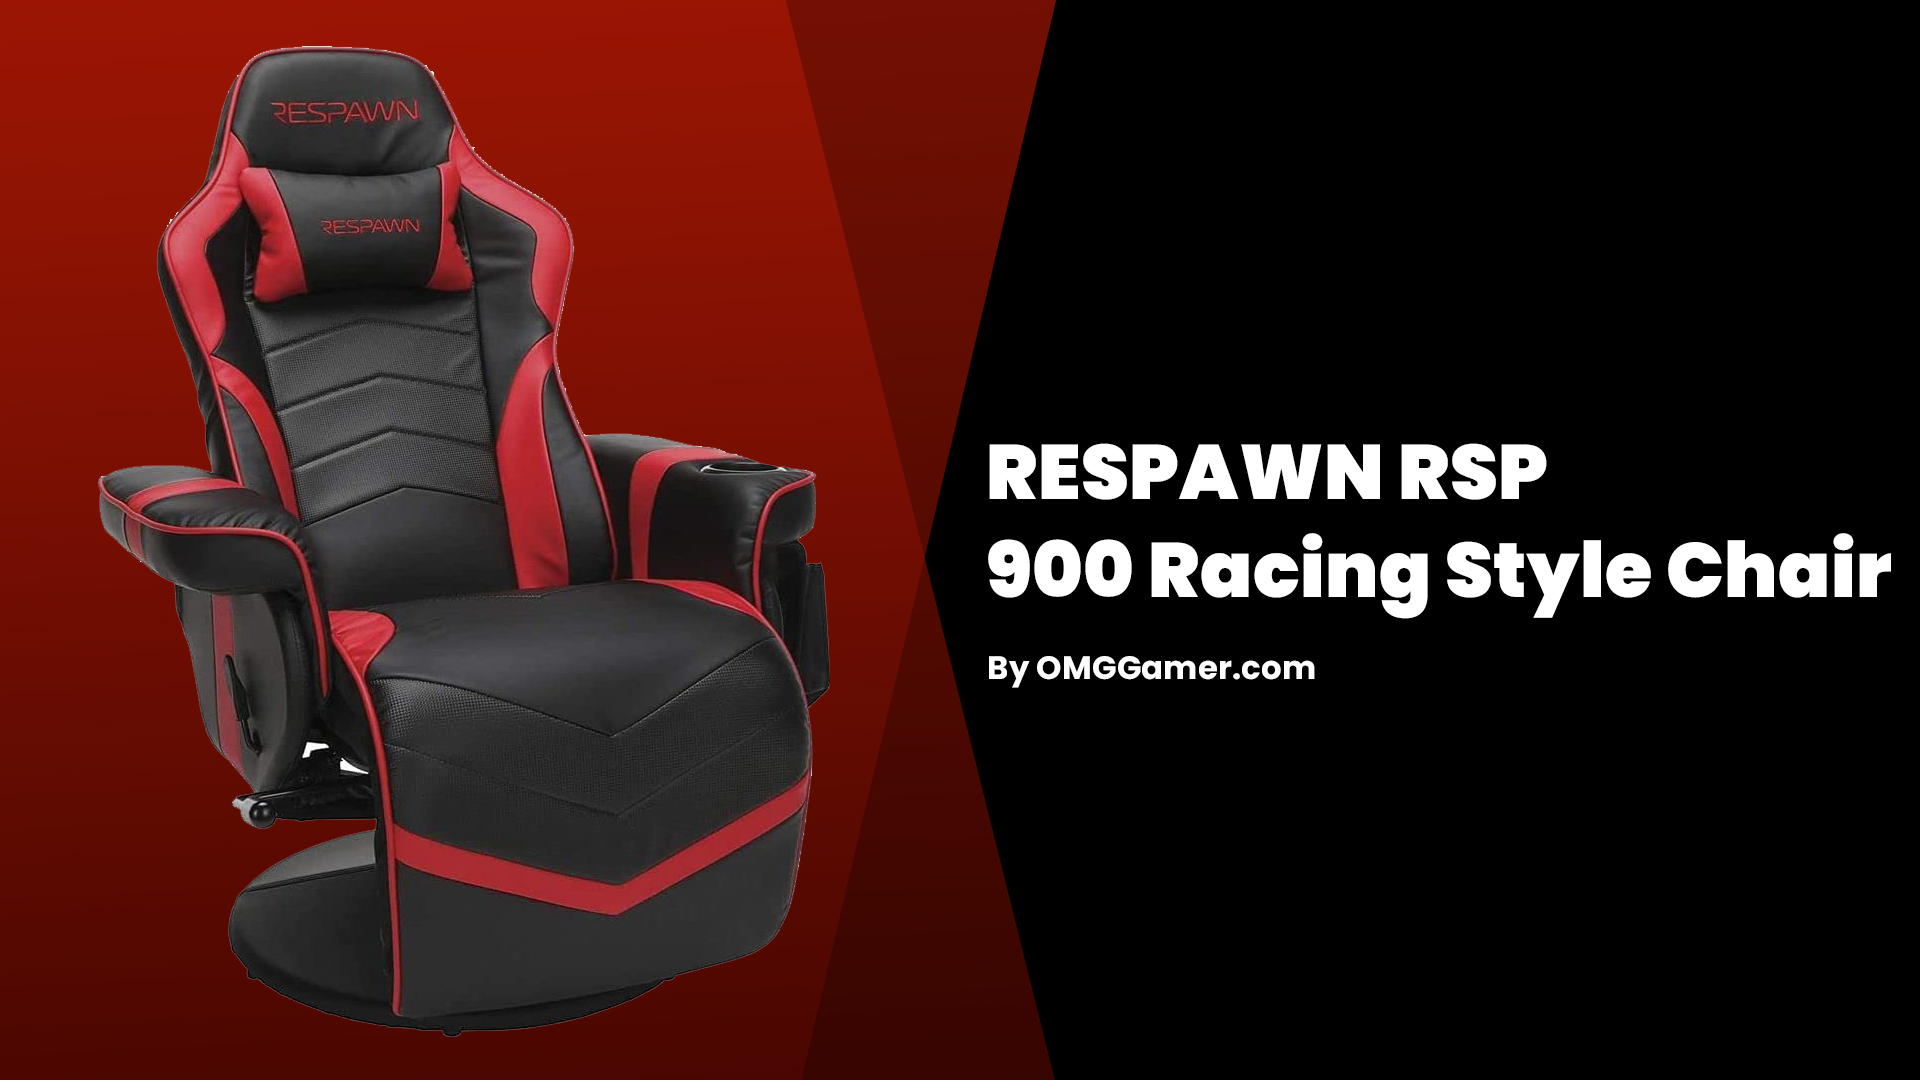 RESPAWN RSP 900 Racing Style Chair